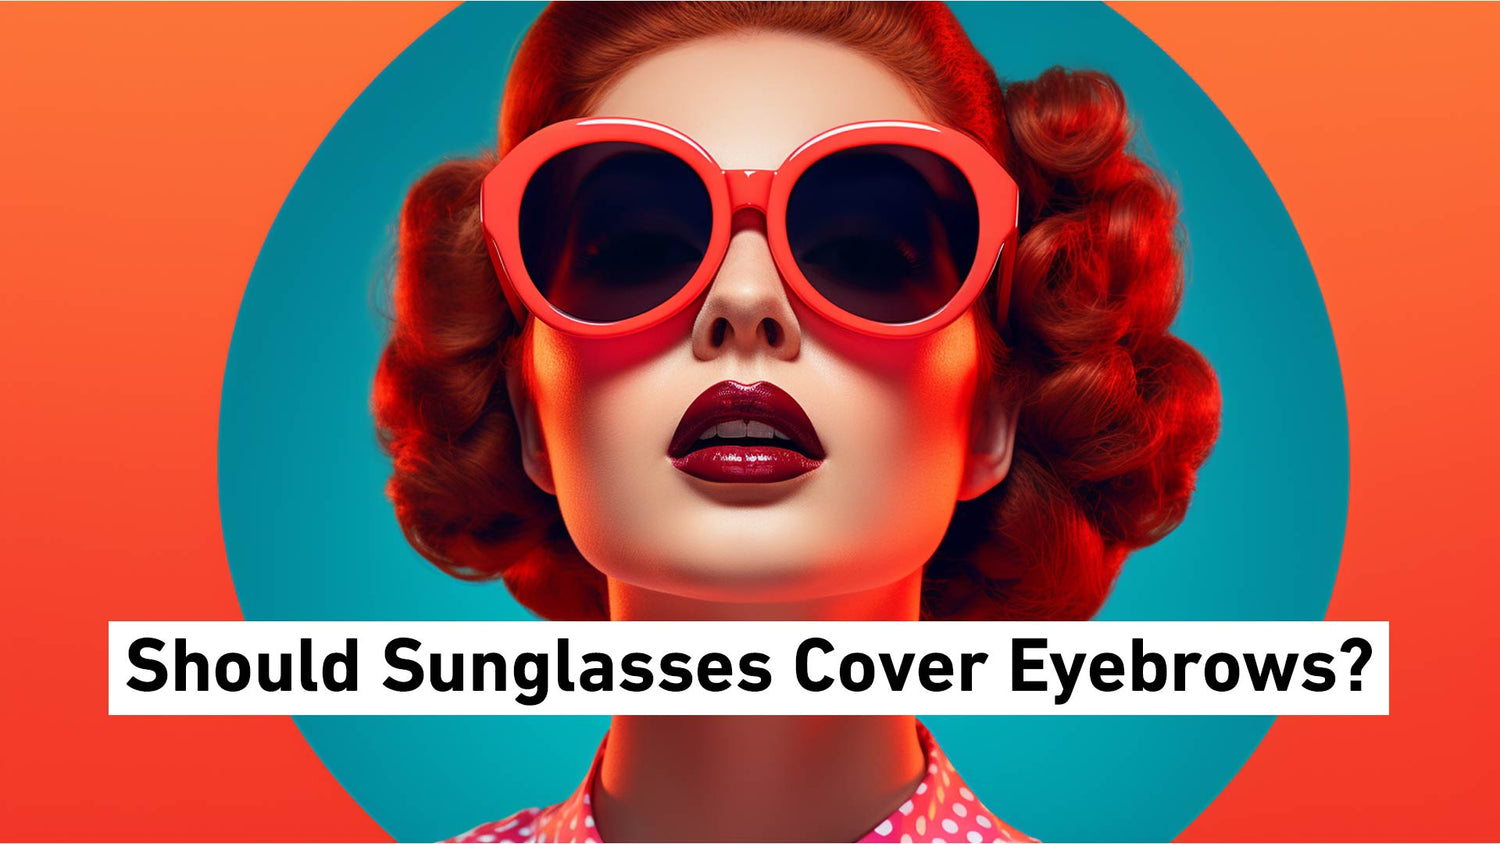 Should Sunglasses Cover Eyebrows?